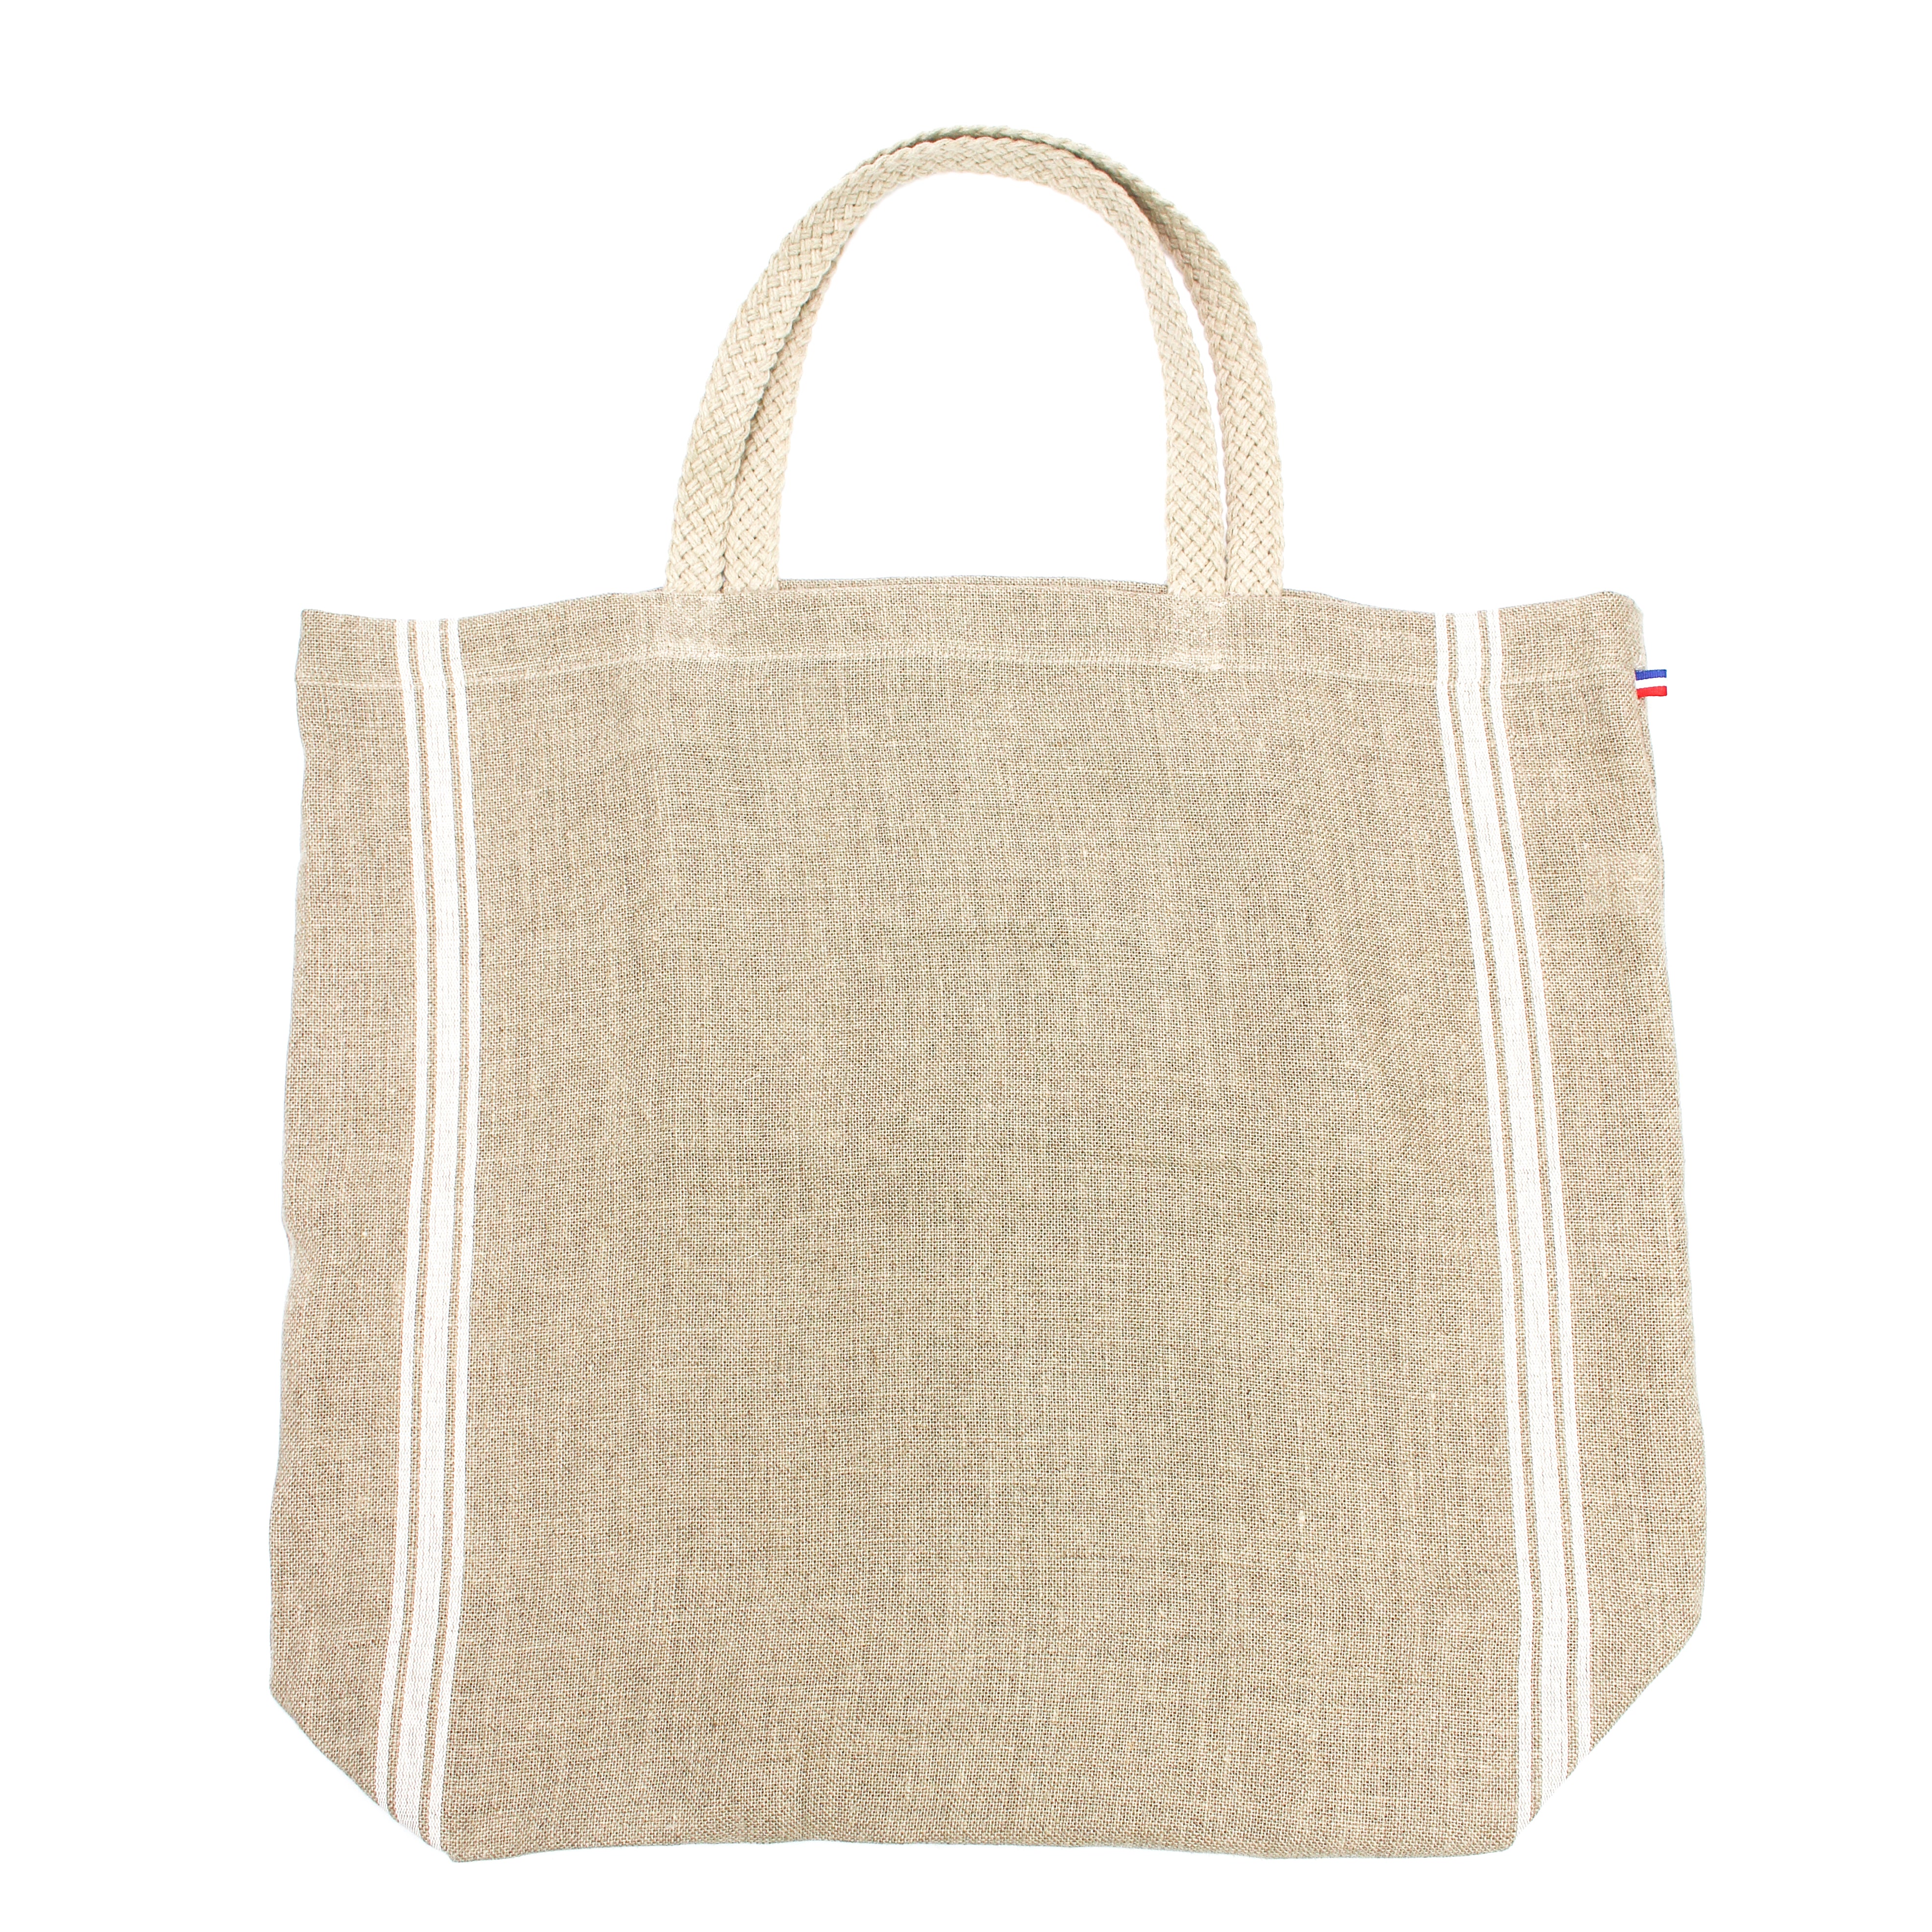 Monogramme Thieffry Linen Tote with Braided Handle and Inner Zipper Pocket Textile Thieffry Brand_Thieffry New Arrivals Shopping Bags Textiles_Tote Bags Thieffry IMG_0318_edit_6b8dc37e-d297-4da6-9700-ef6440bbeb61